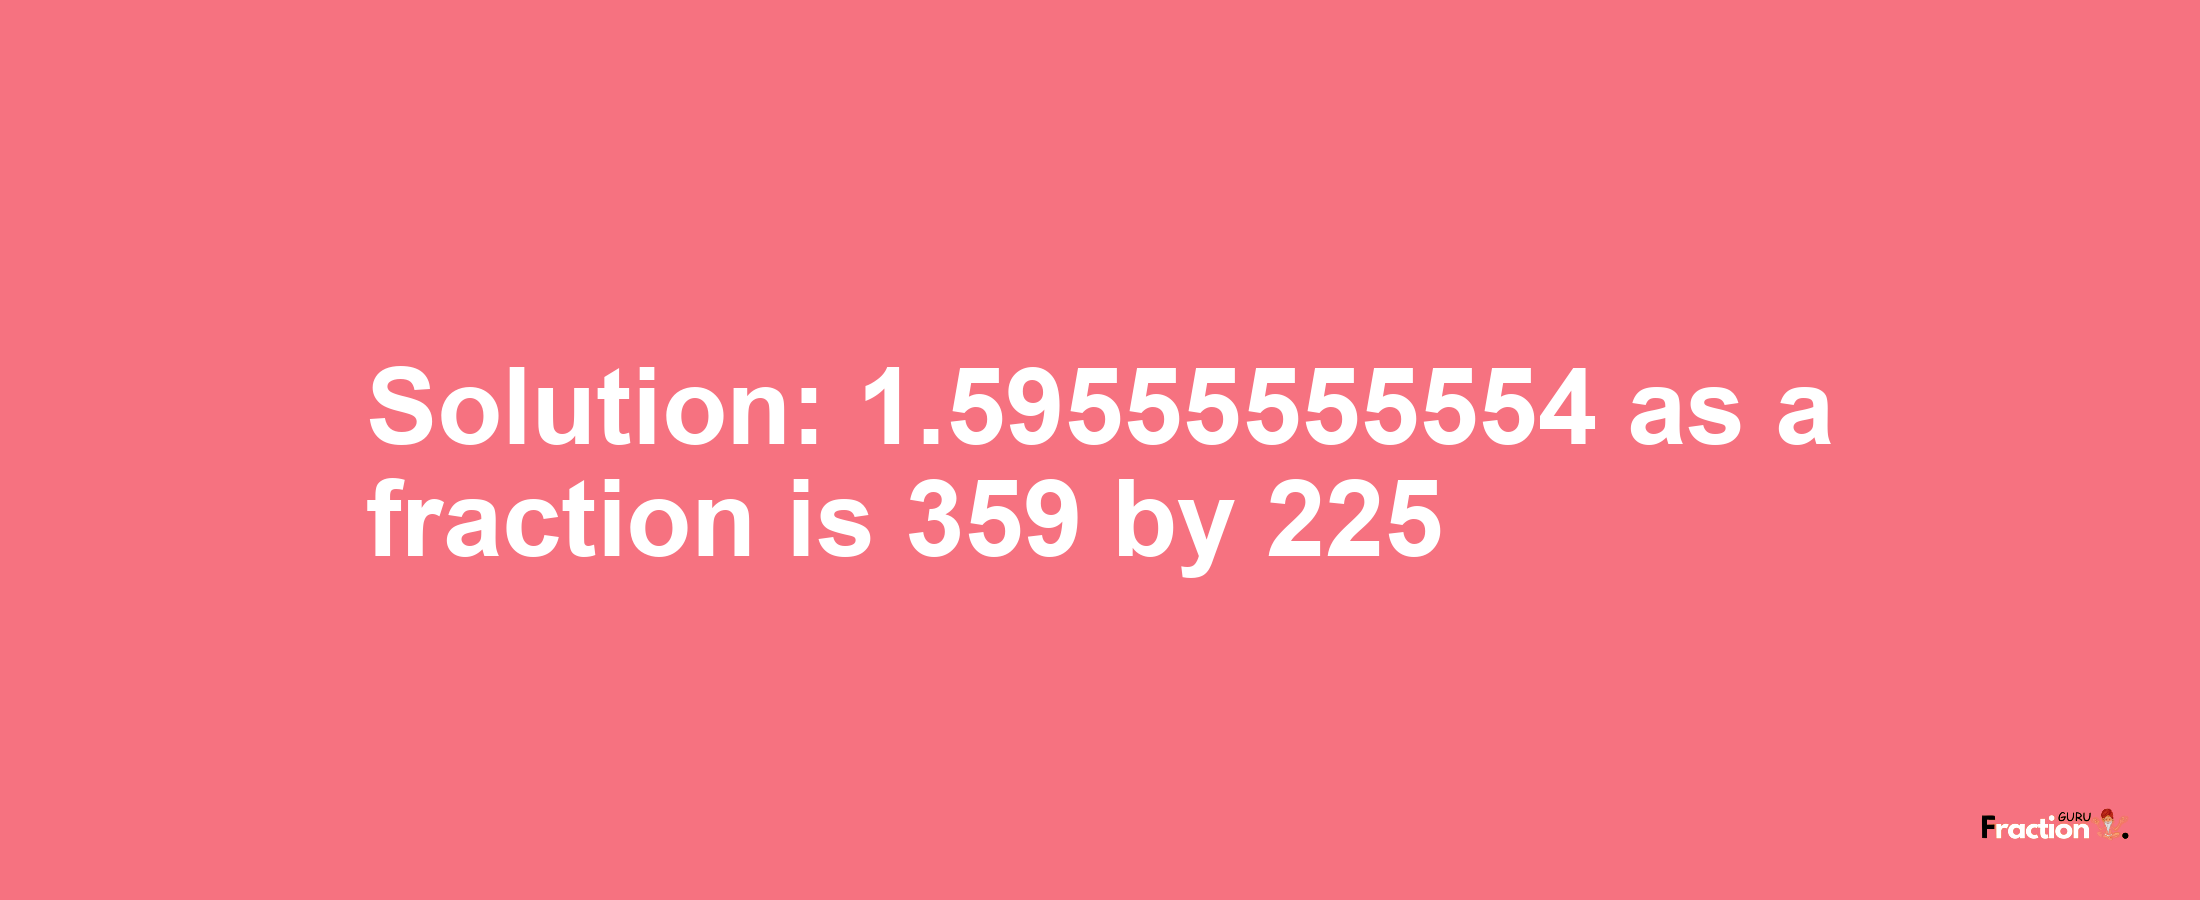 Solution:1.59555555554 as a fraction is 359/225